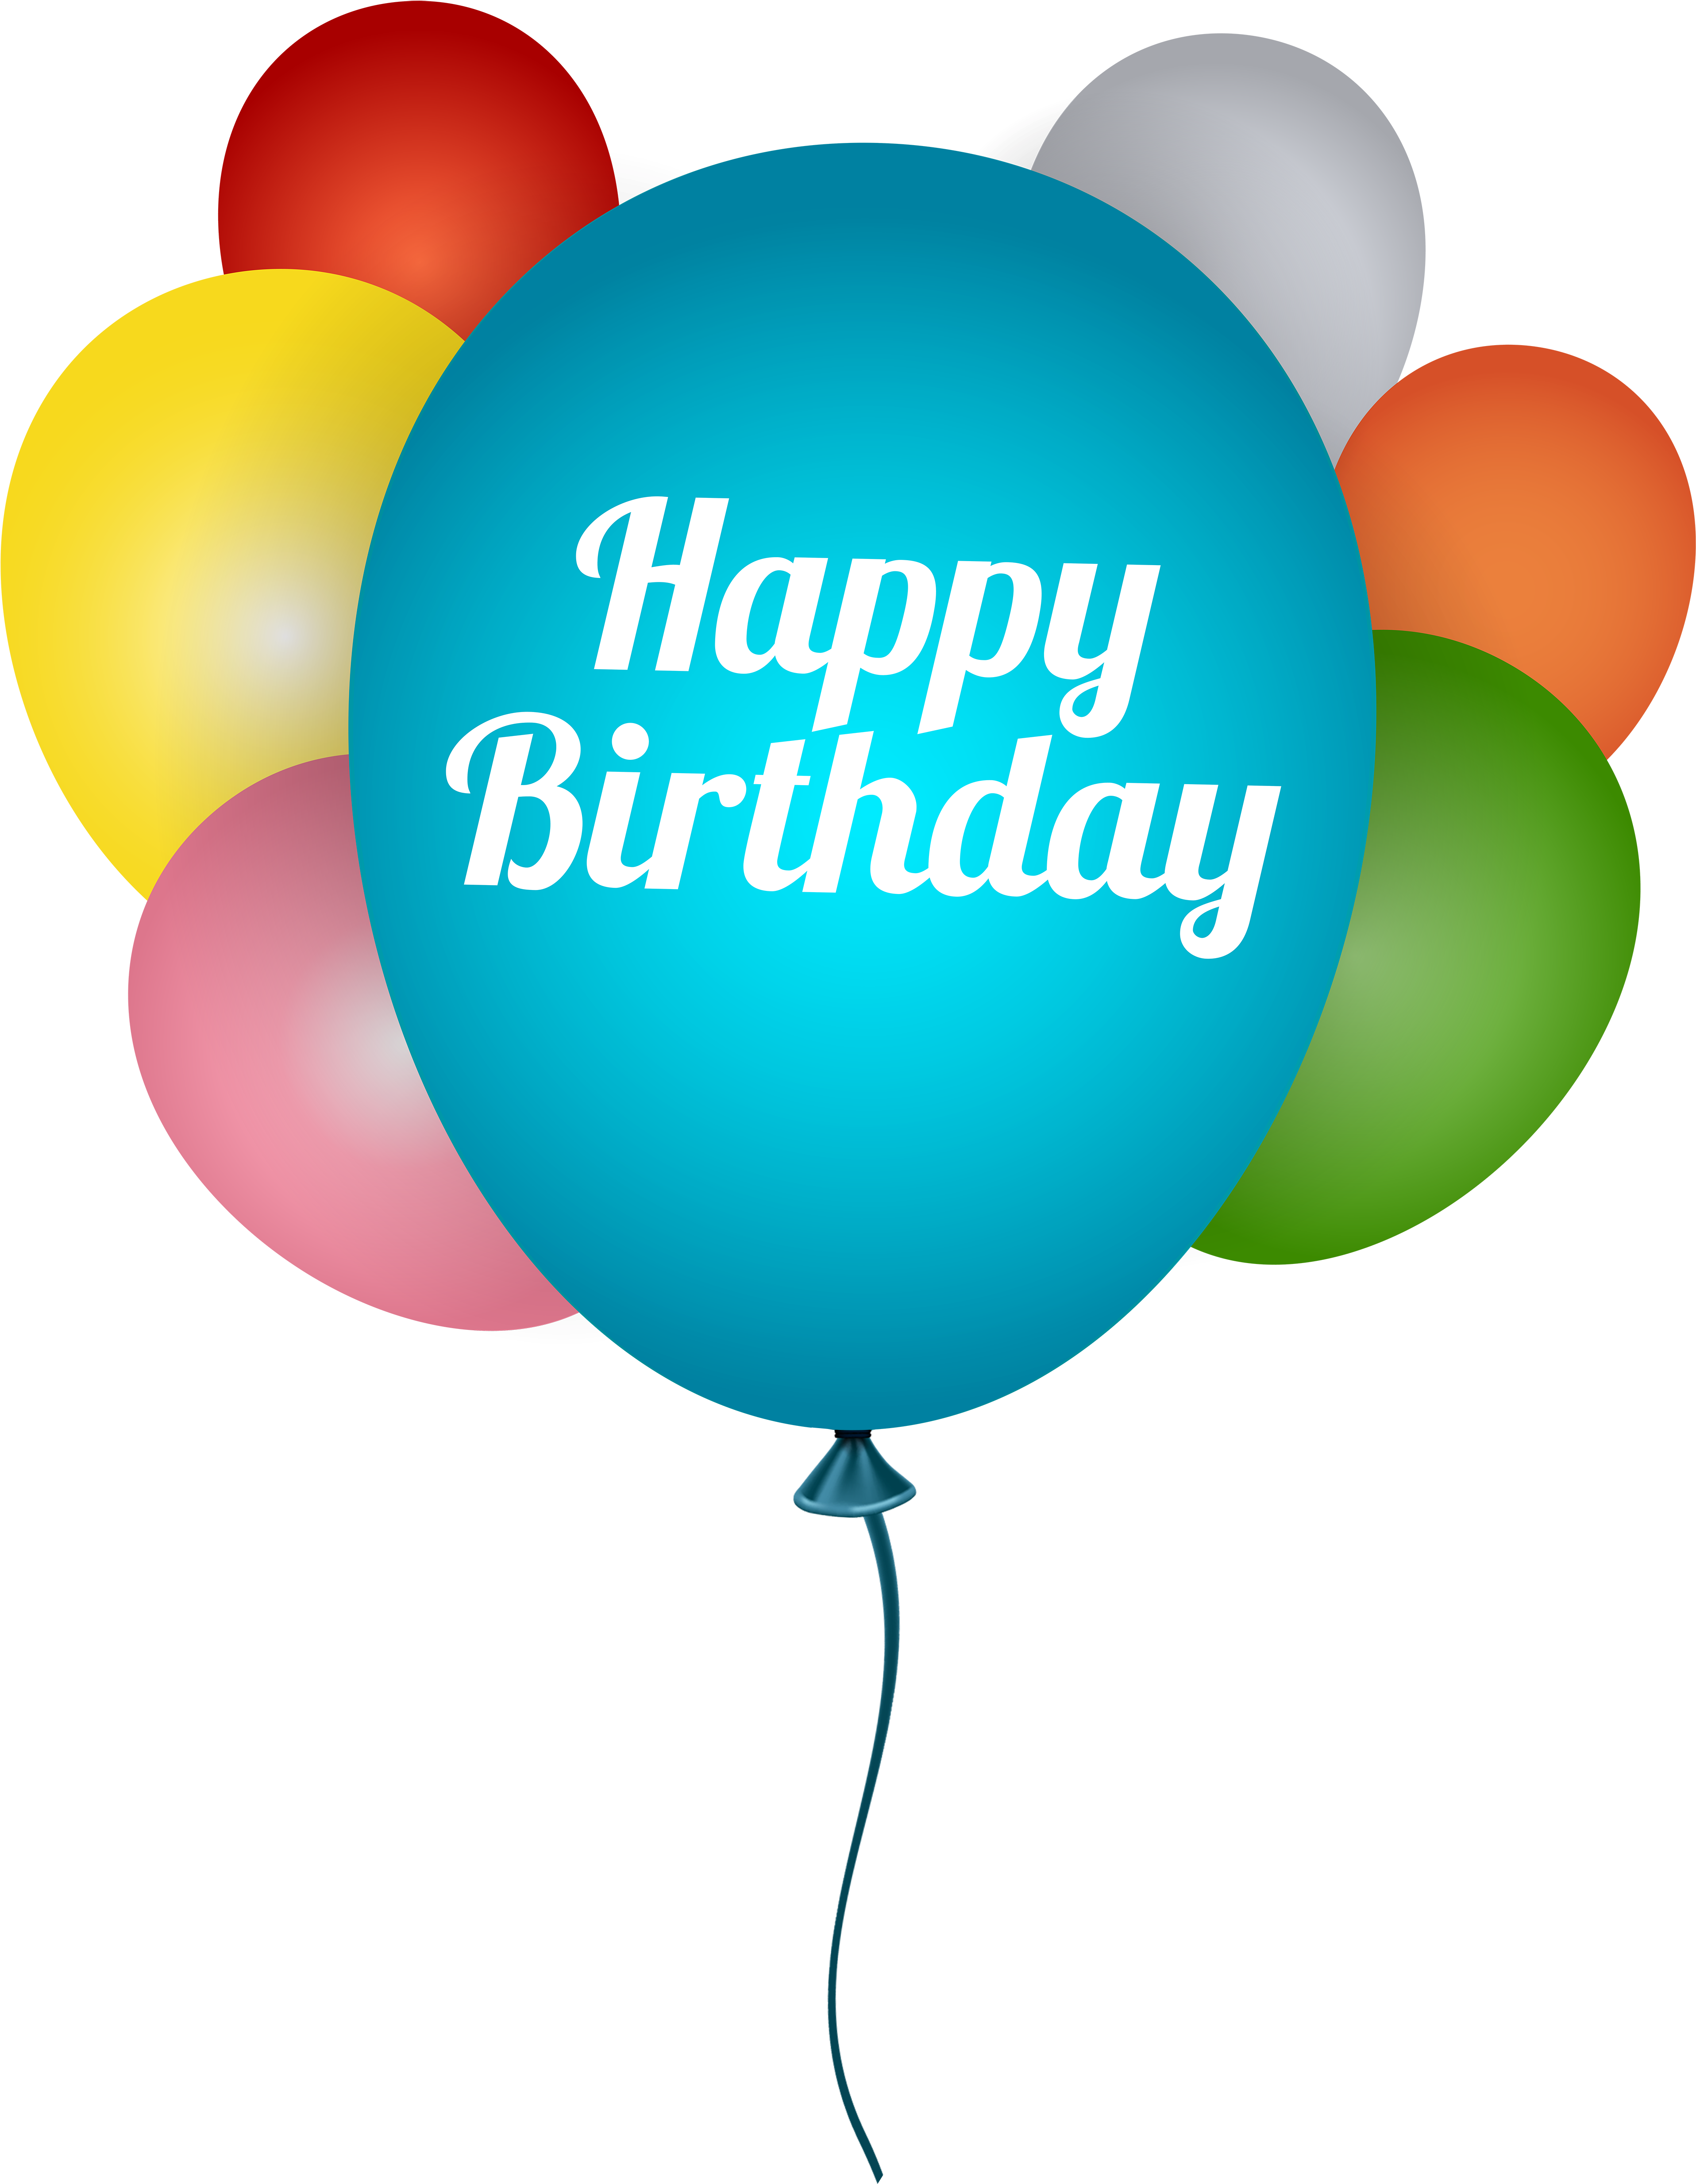 Happy Birthday Balloons Transparent Png Clip Art Image - Happy Birthday Balloons Transparent (3970x5000)